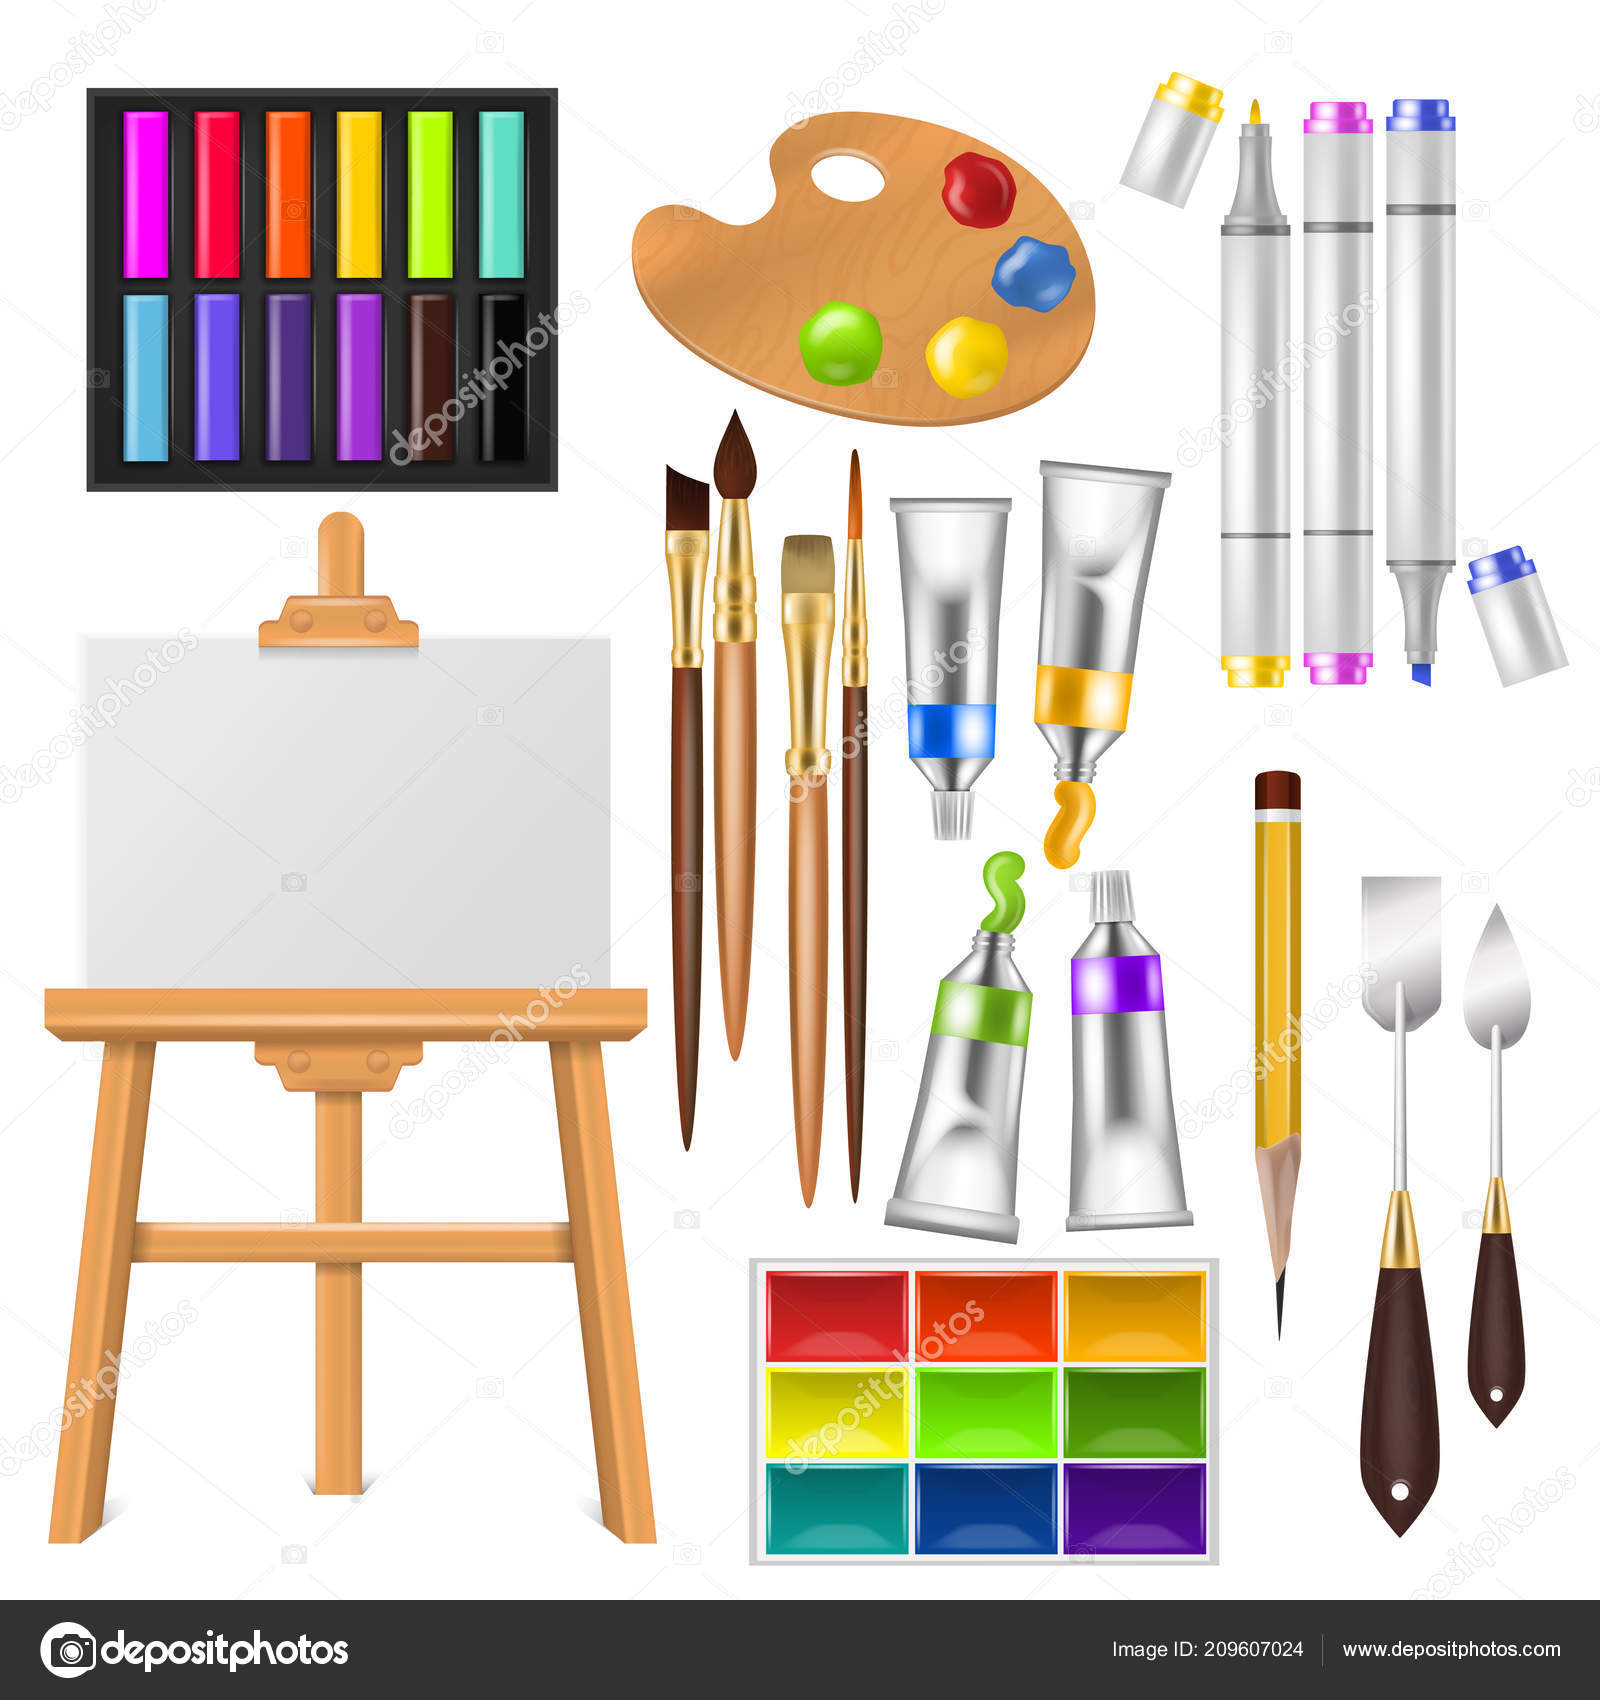 Art Painting Tools And Accessories, Vector Isolated Illustration